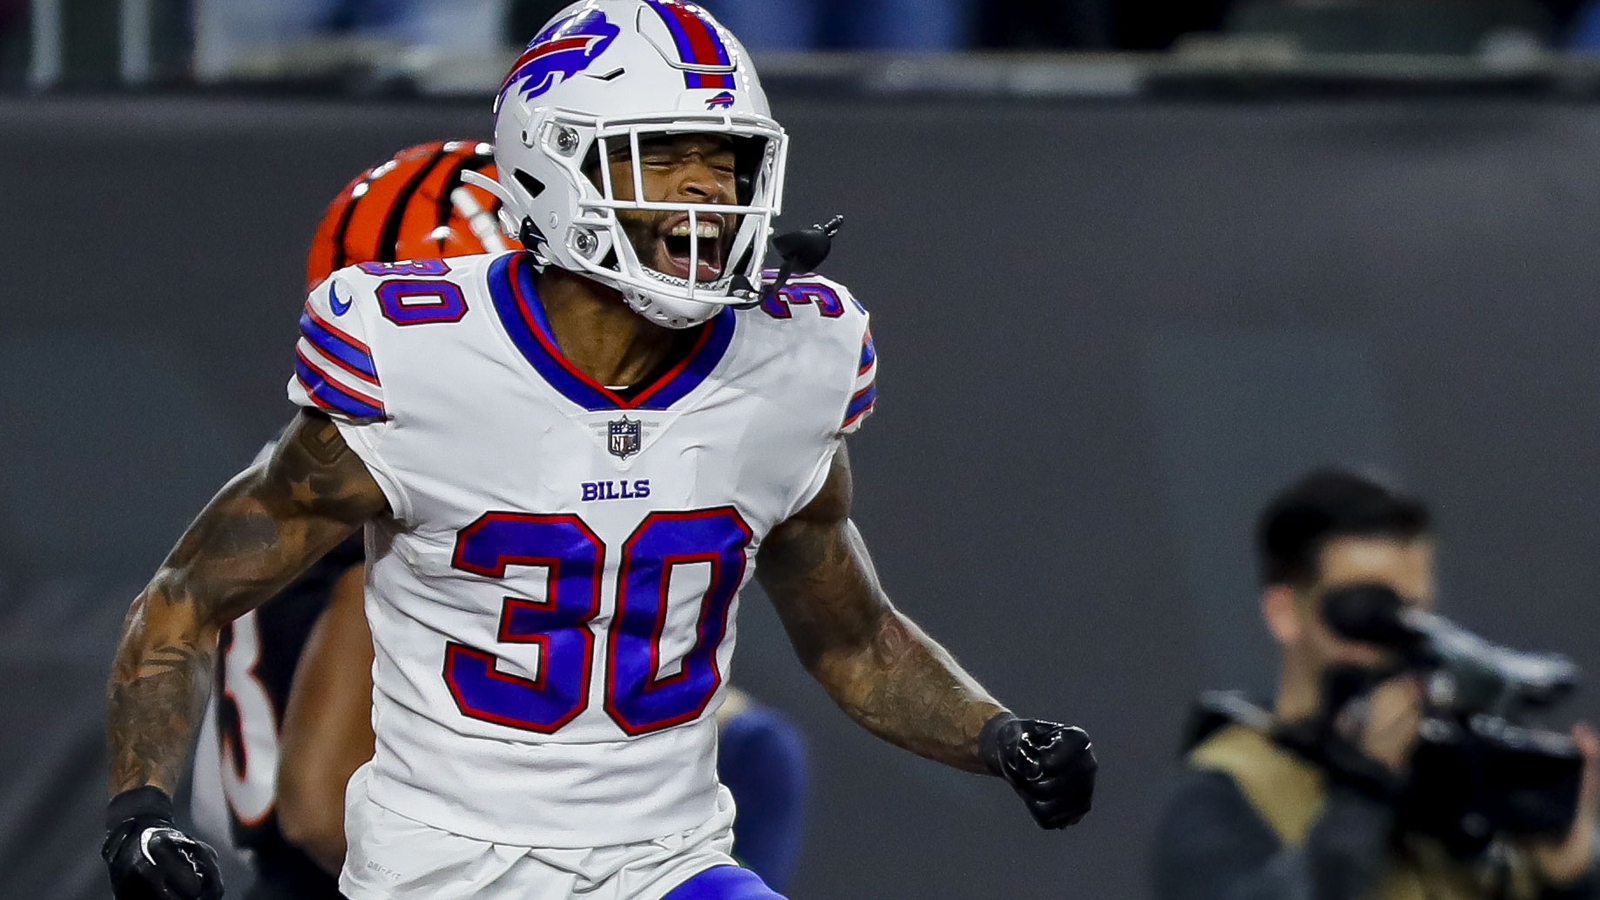 Panthers bolster secondary with addition of former Bills CB